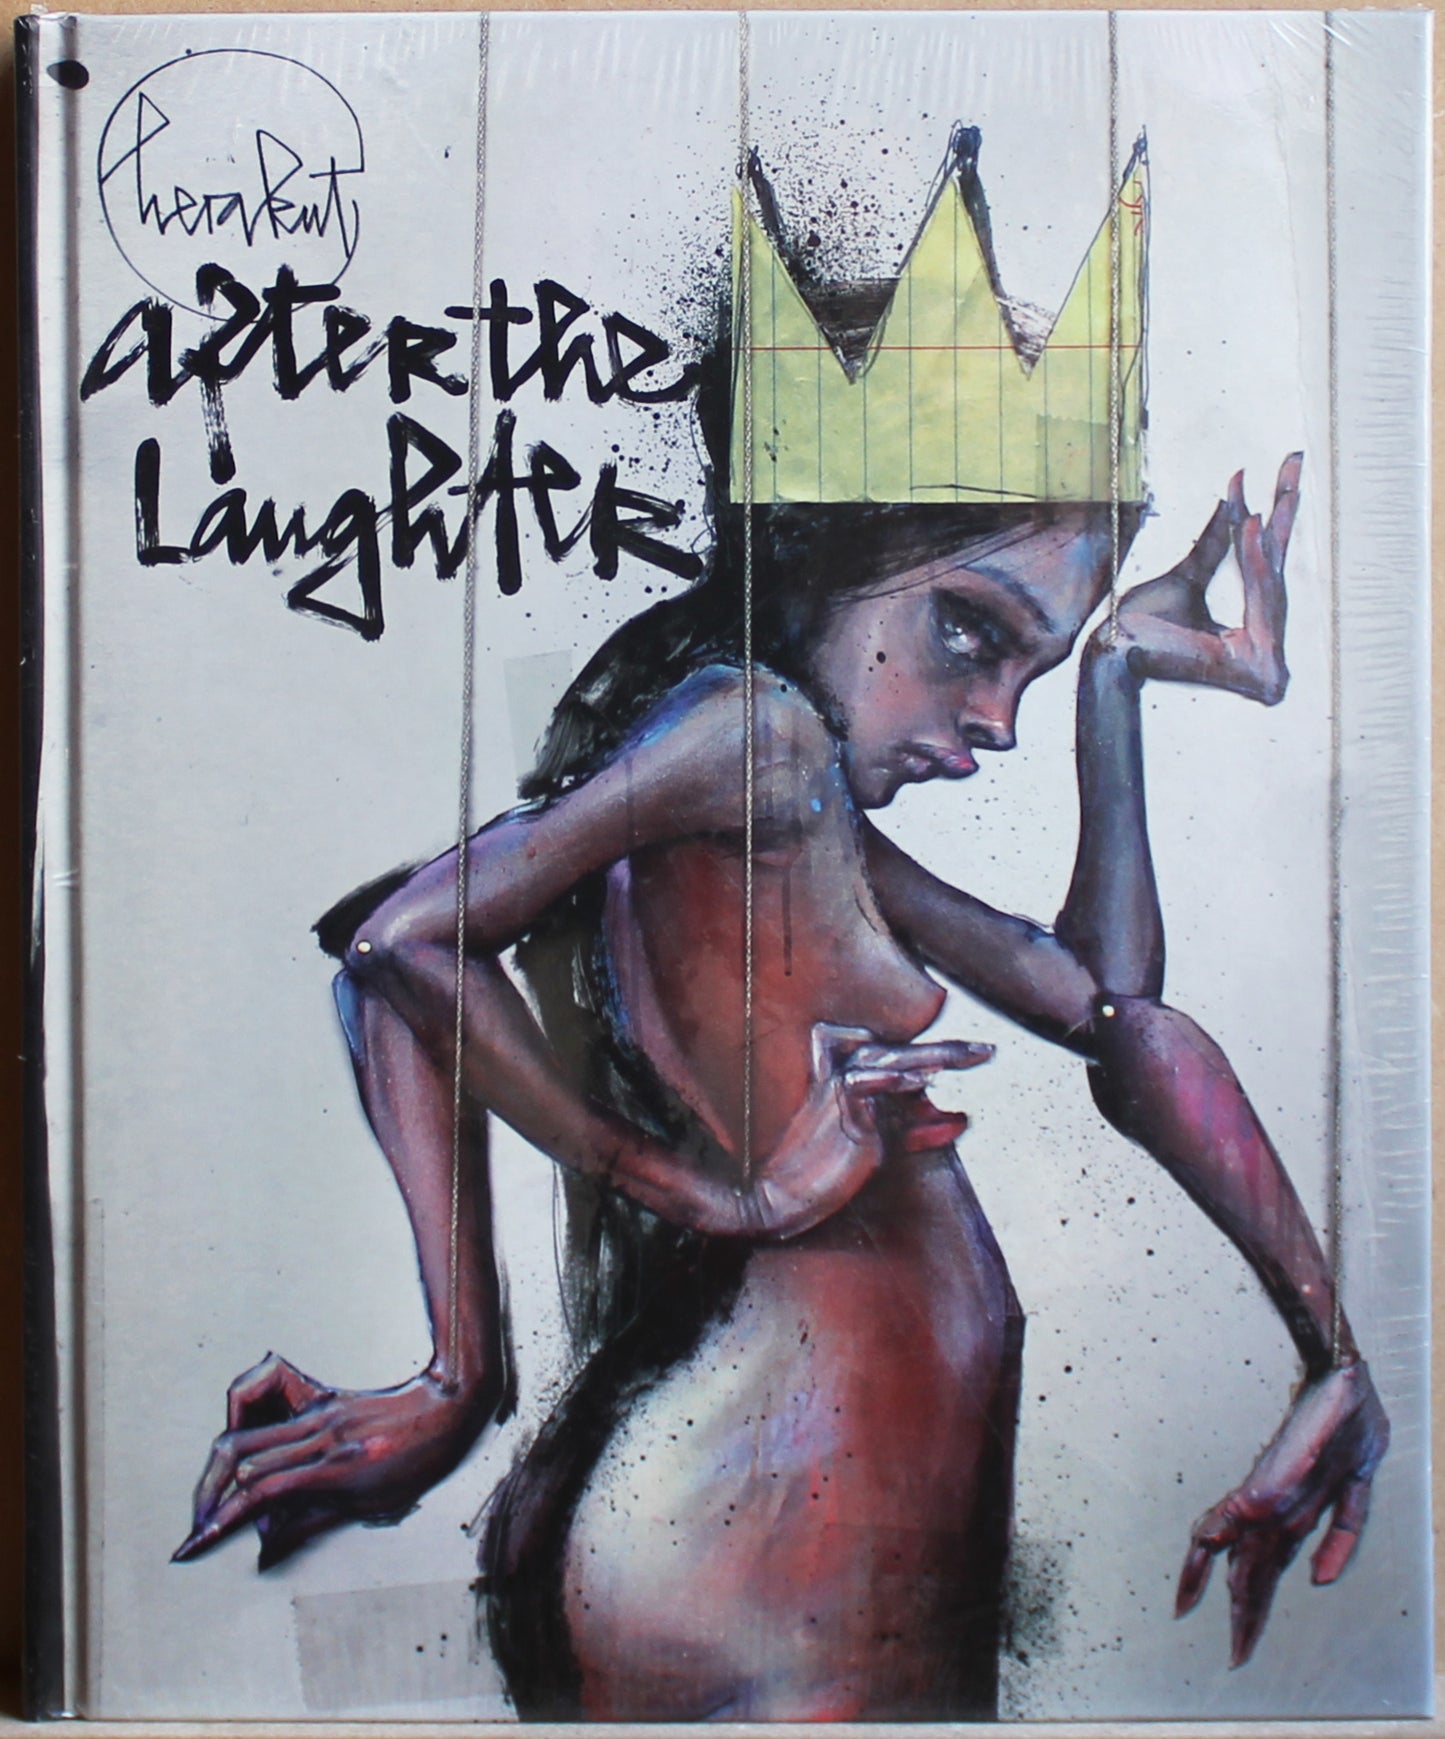 Herakut: After the Laughter (Artbook HC)